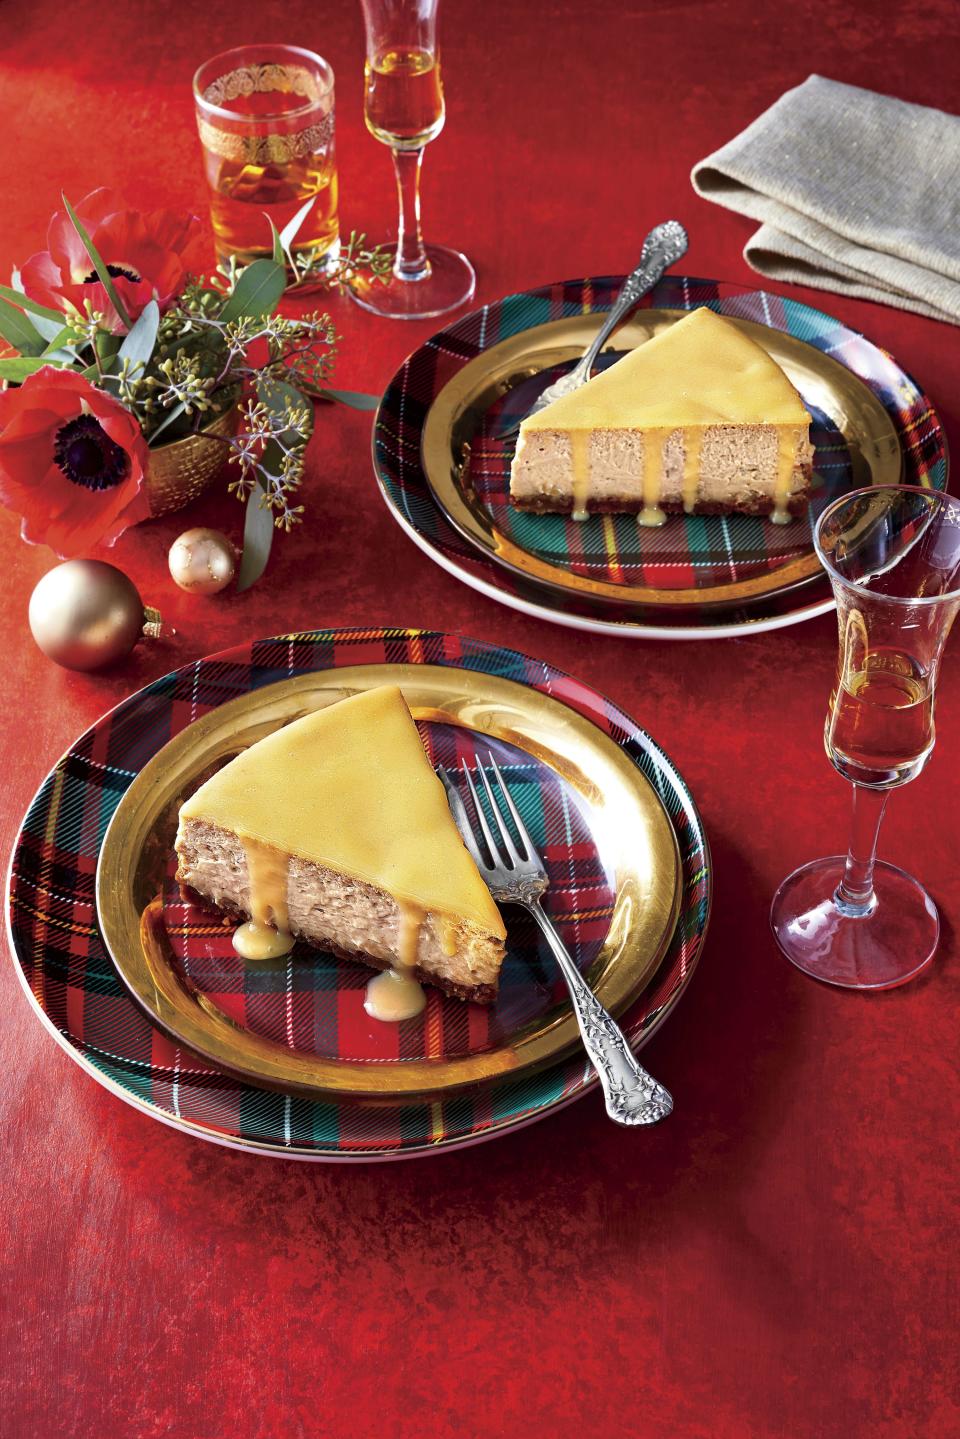 Gingerbread Cheesecake with Lemon-Ginger Glaze